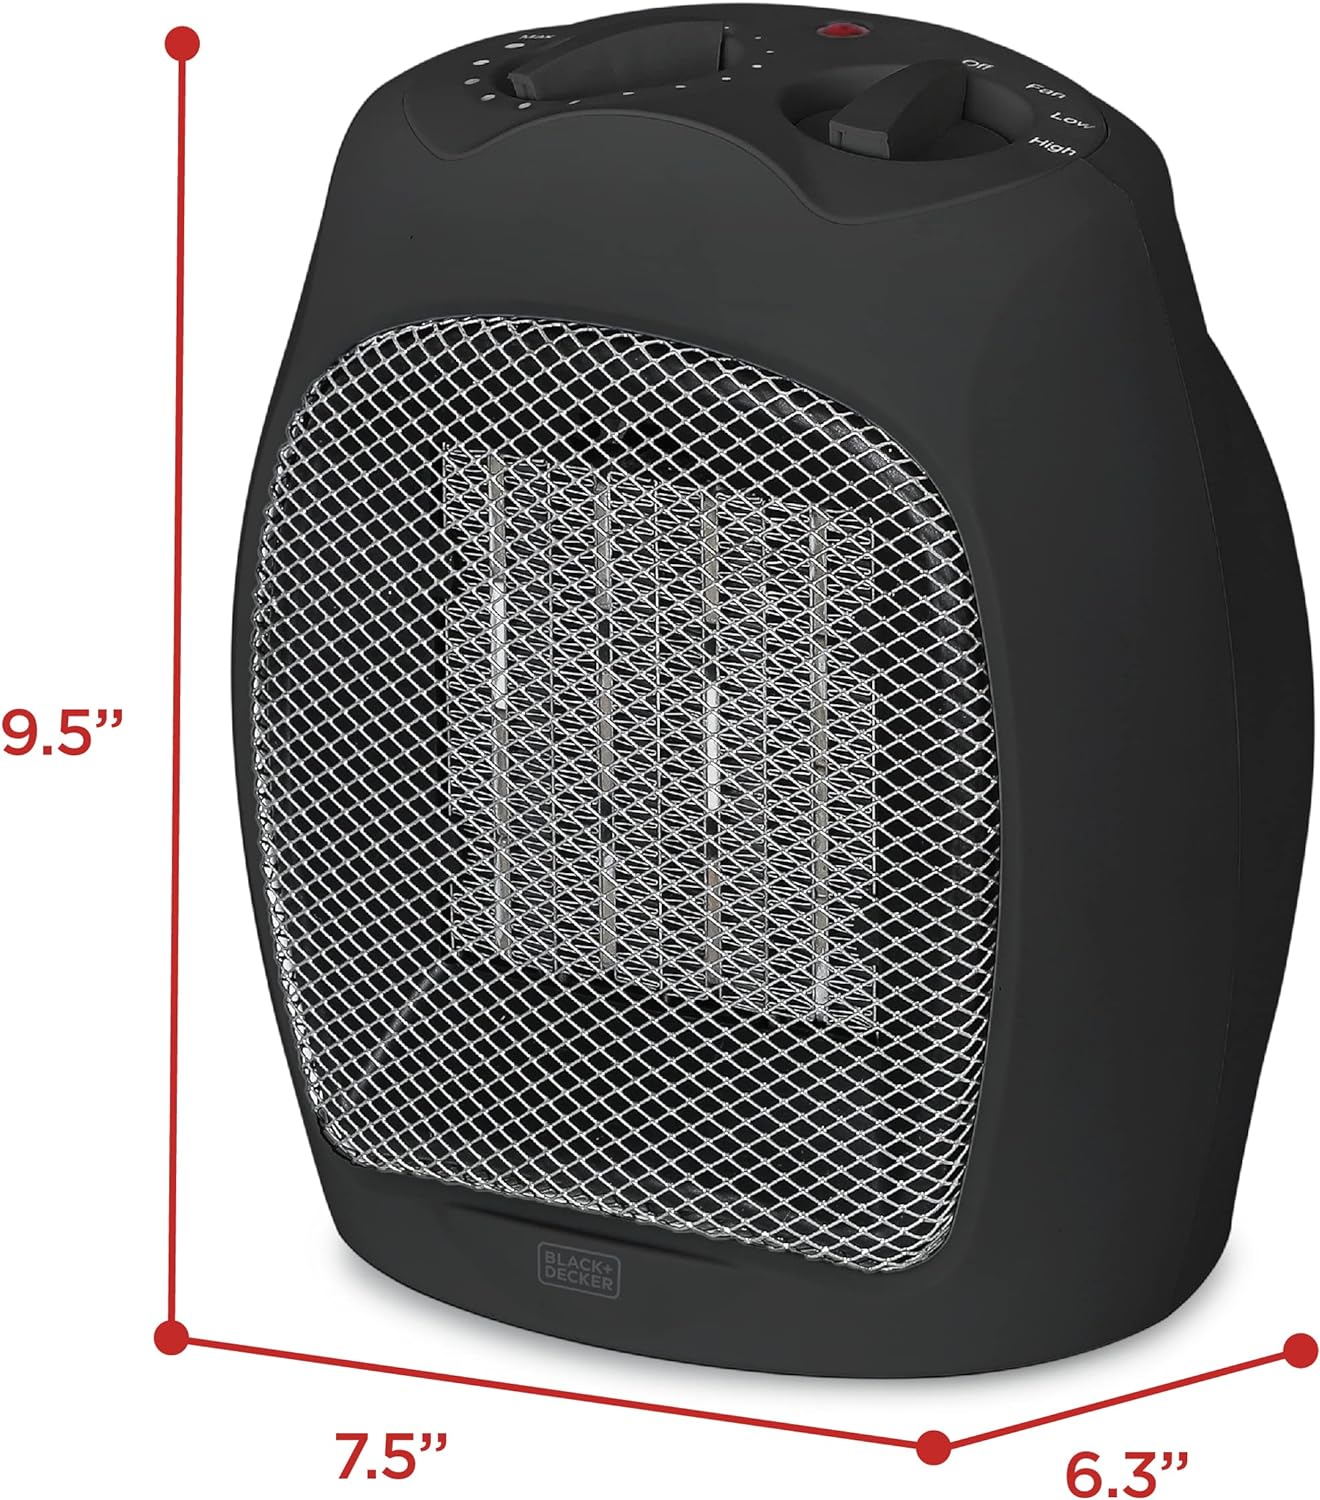 https://bigbigmart.com/wp-content/uploads/2023/11/BLACKDECKER-Electric-Heater-Portable-Heater-with-3-Settings-Ceramic-Heater-for-Office-Home-or-Bedroom-Space-Heater-with-Adjustable-Thermostat-Control-Black8.jpg